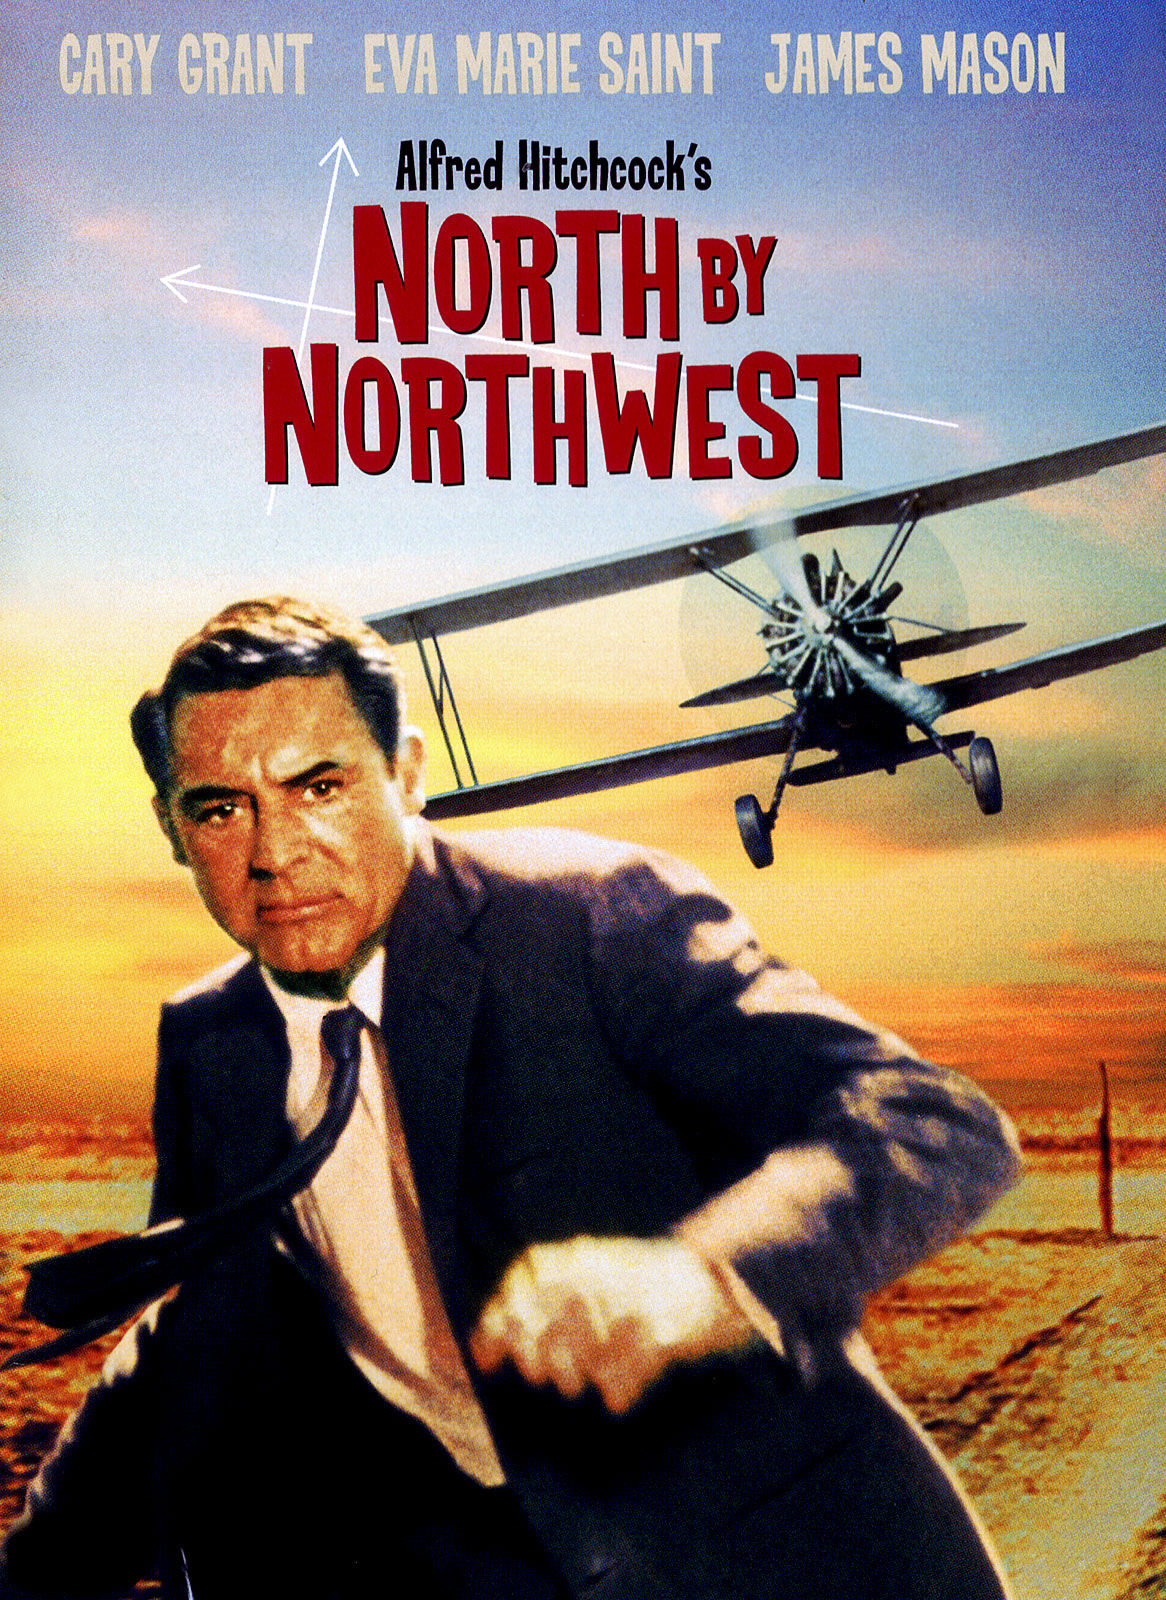 North by Northwest was another James-Bond-like movie with secret